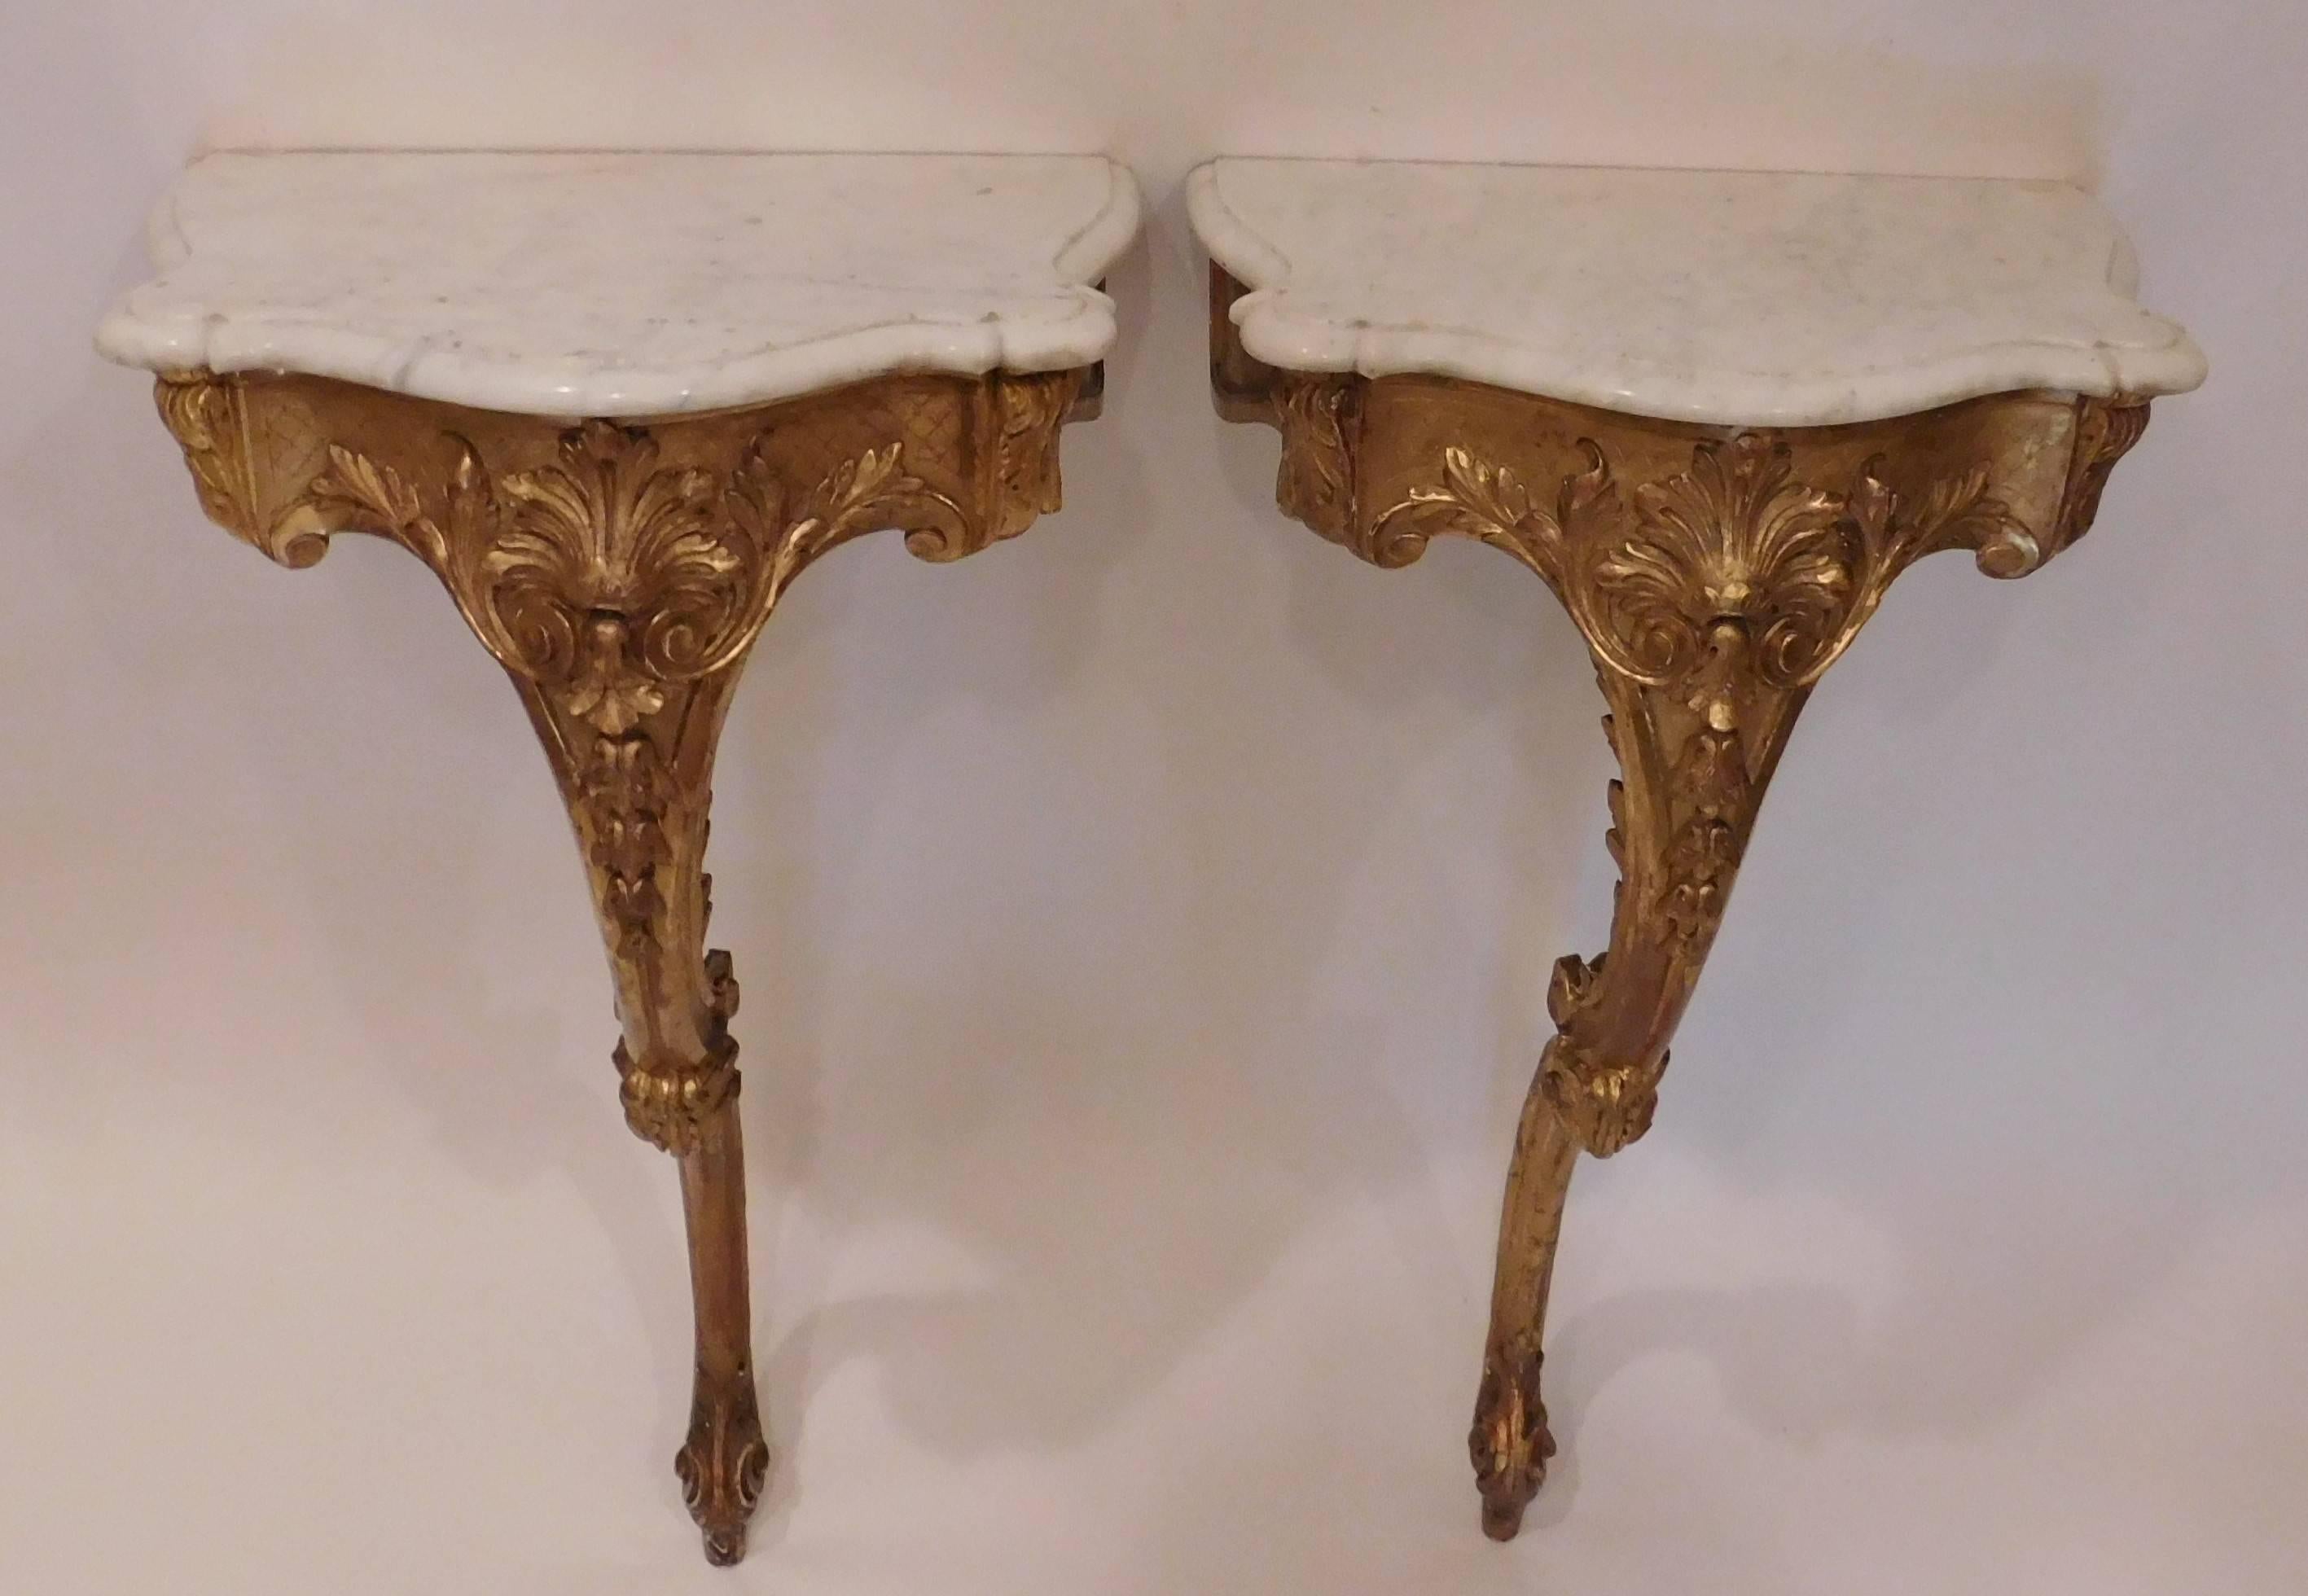 Gold leaf and gilt on gesso on wood with attached marble tops, wall-mounted with single leg, hand-carved, made in either Italy or France.